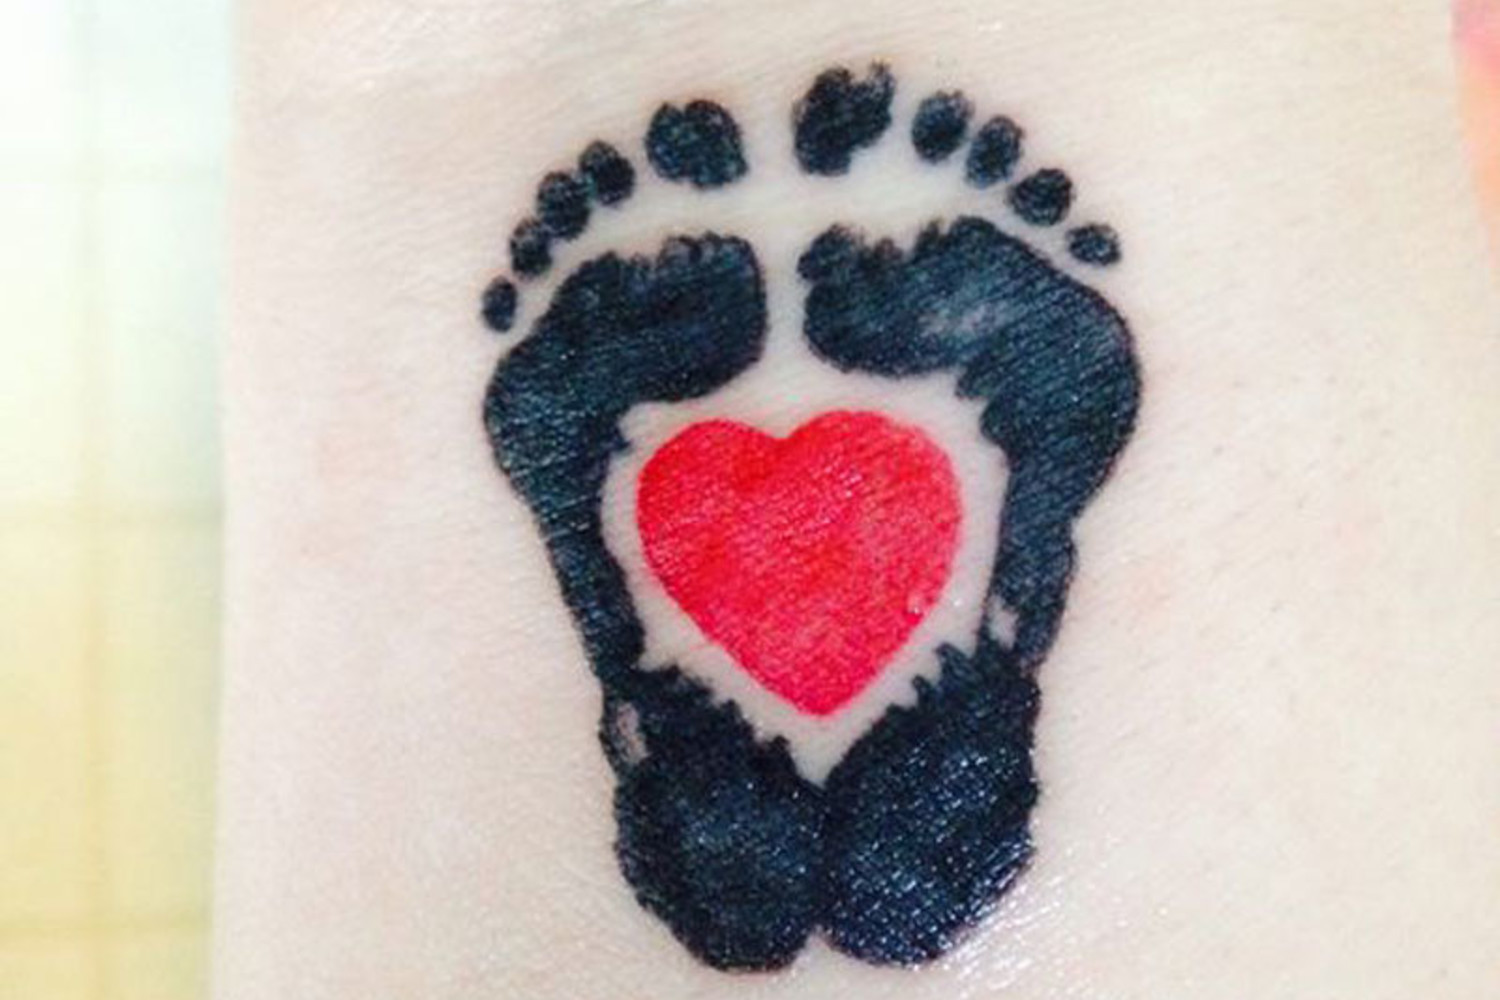 22 Baby Tattoo Ideas For Moms And Dads  Styleoholic